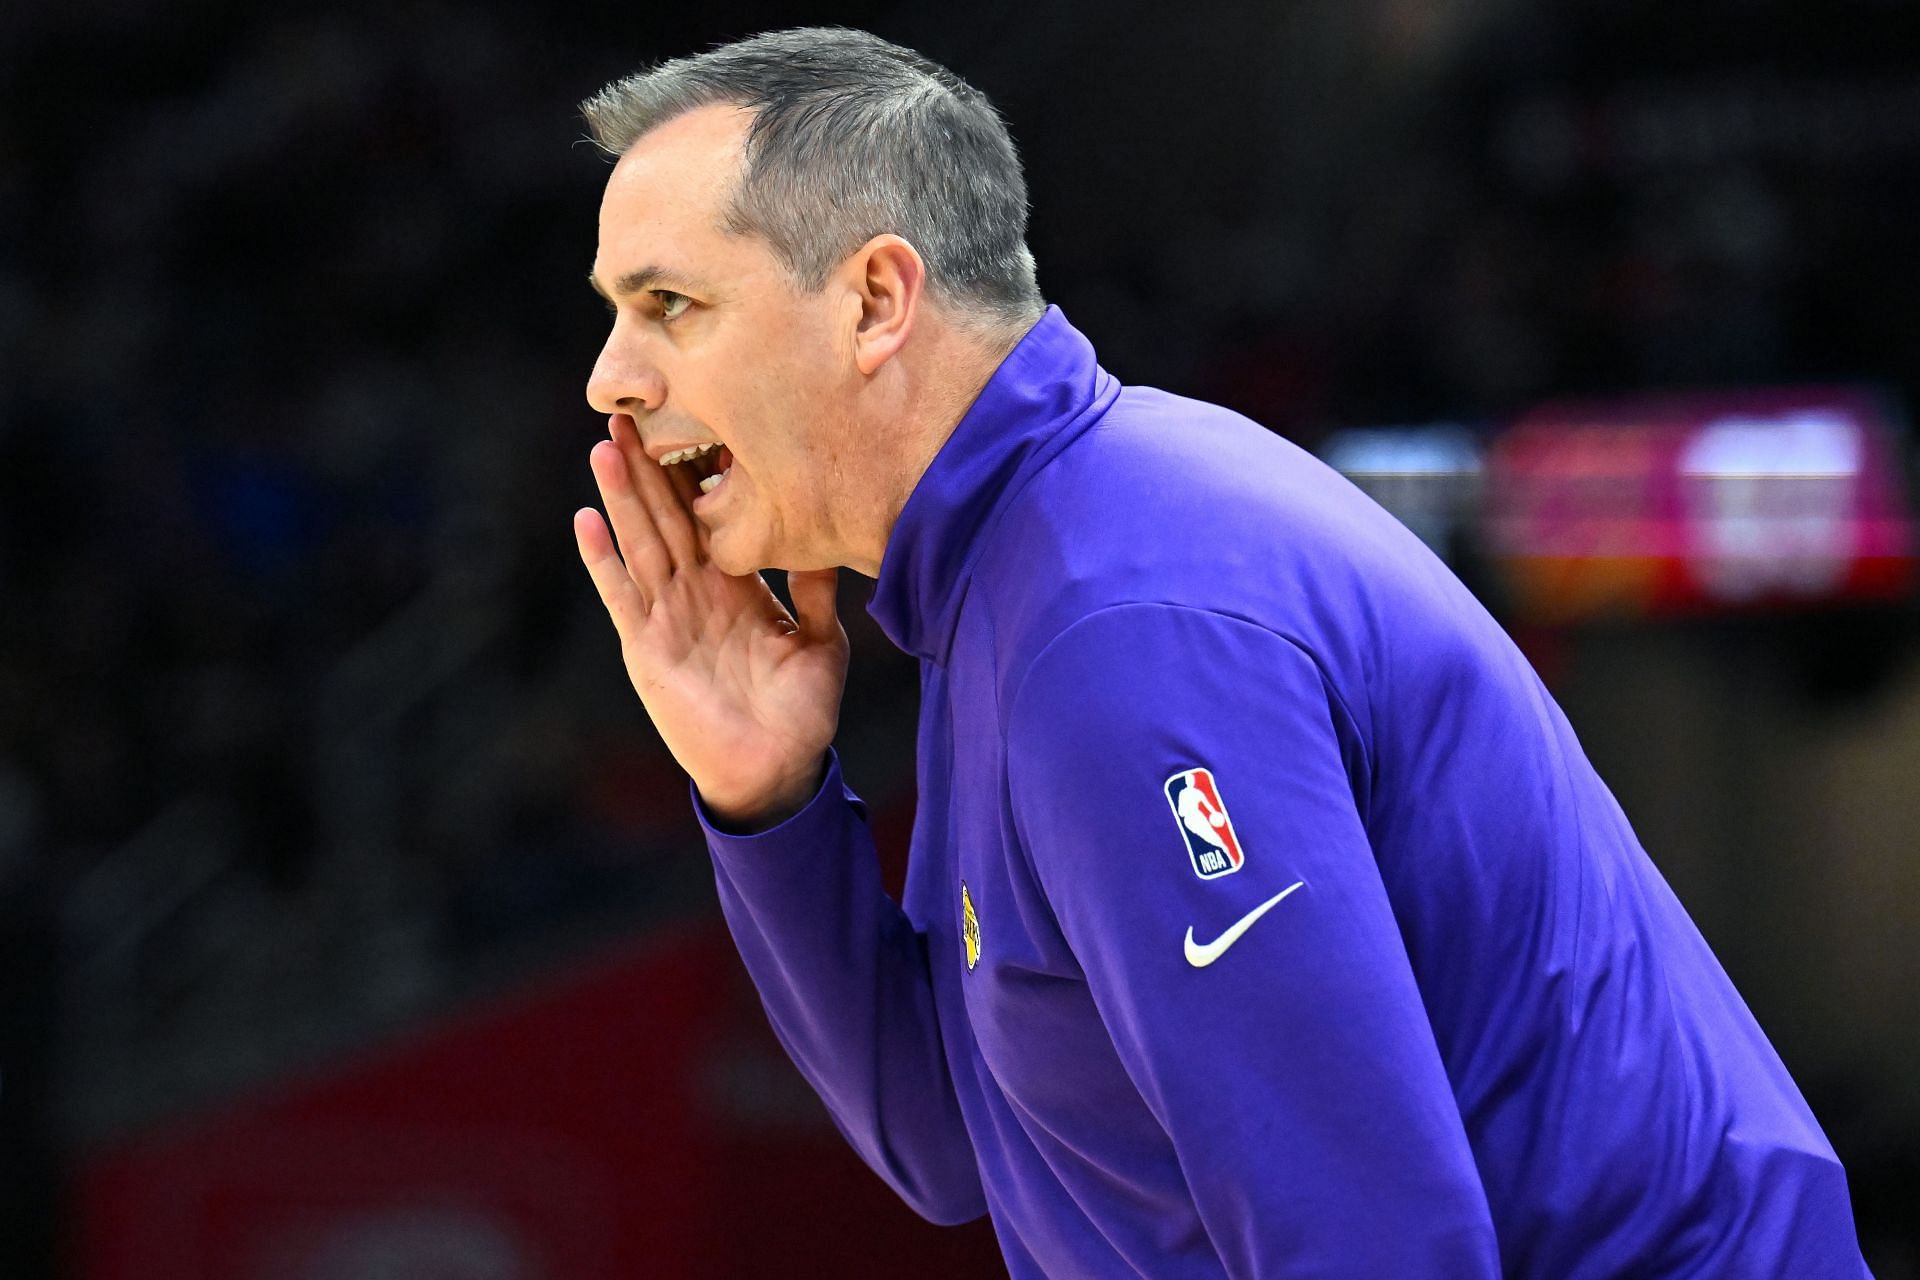 Head coach Frank Vogel of the Los Angeles Lakers yells to his players during the fourth quarter against the Cleveland Cavaliers at Rocket Mortgage Fieldhouse on March 21, 2022 in Cleveland, Ohio. The Lakers defeated the Cavaliers 131-120.